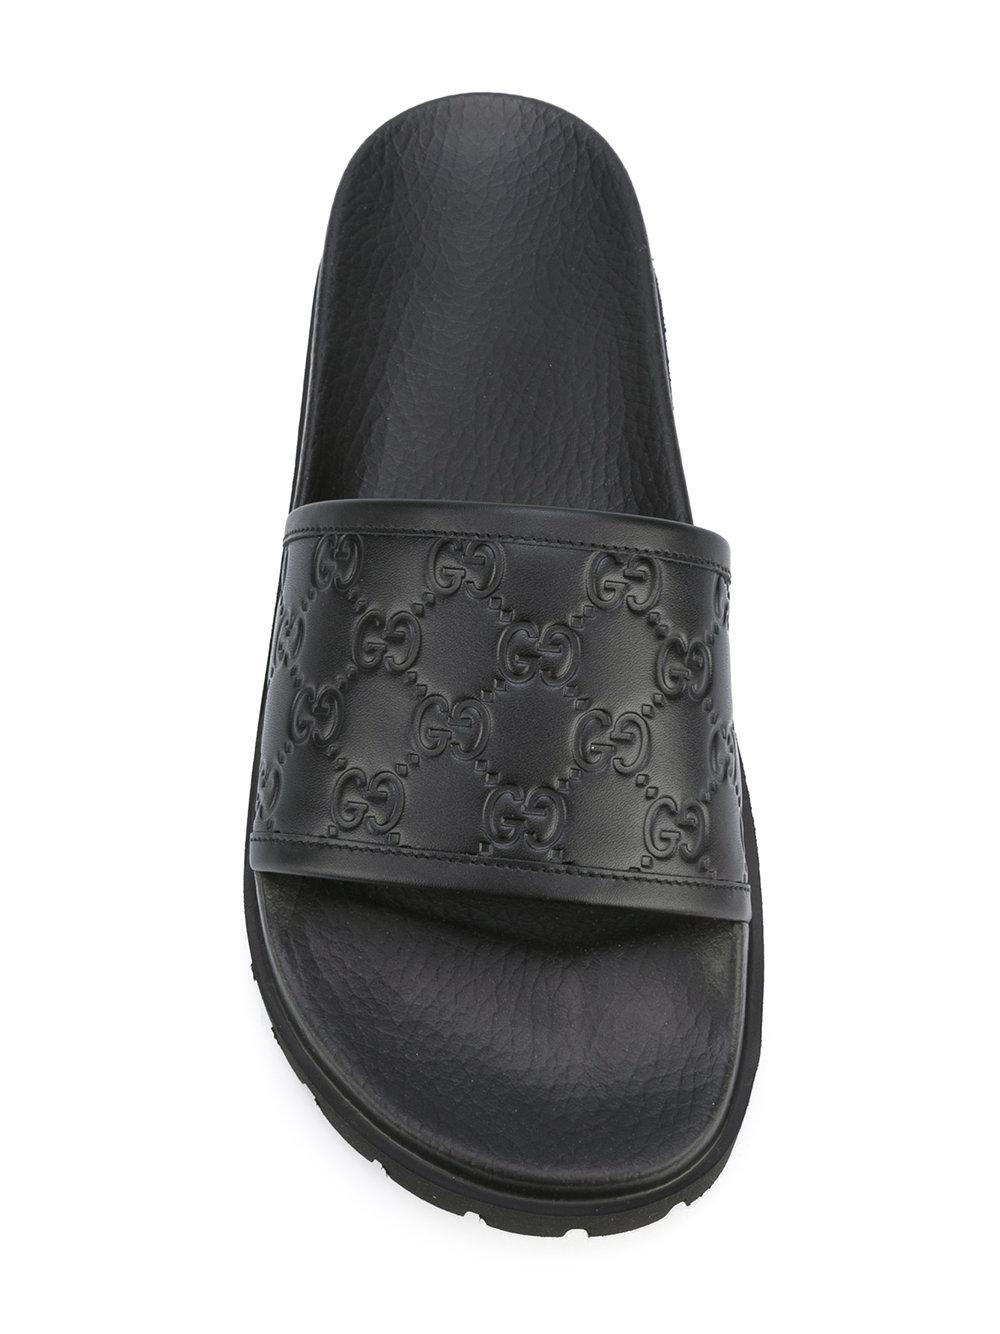 Gucci Leather Logo Embossed Slides in Black - Lyst